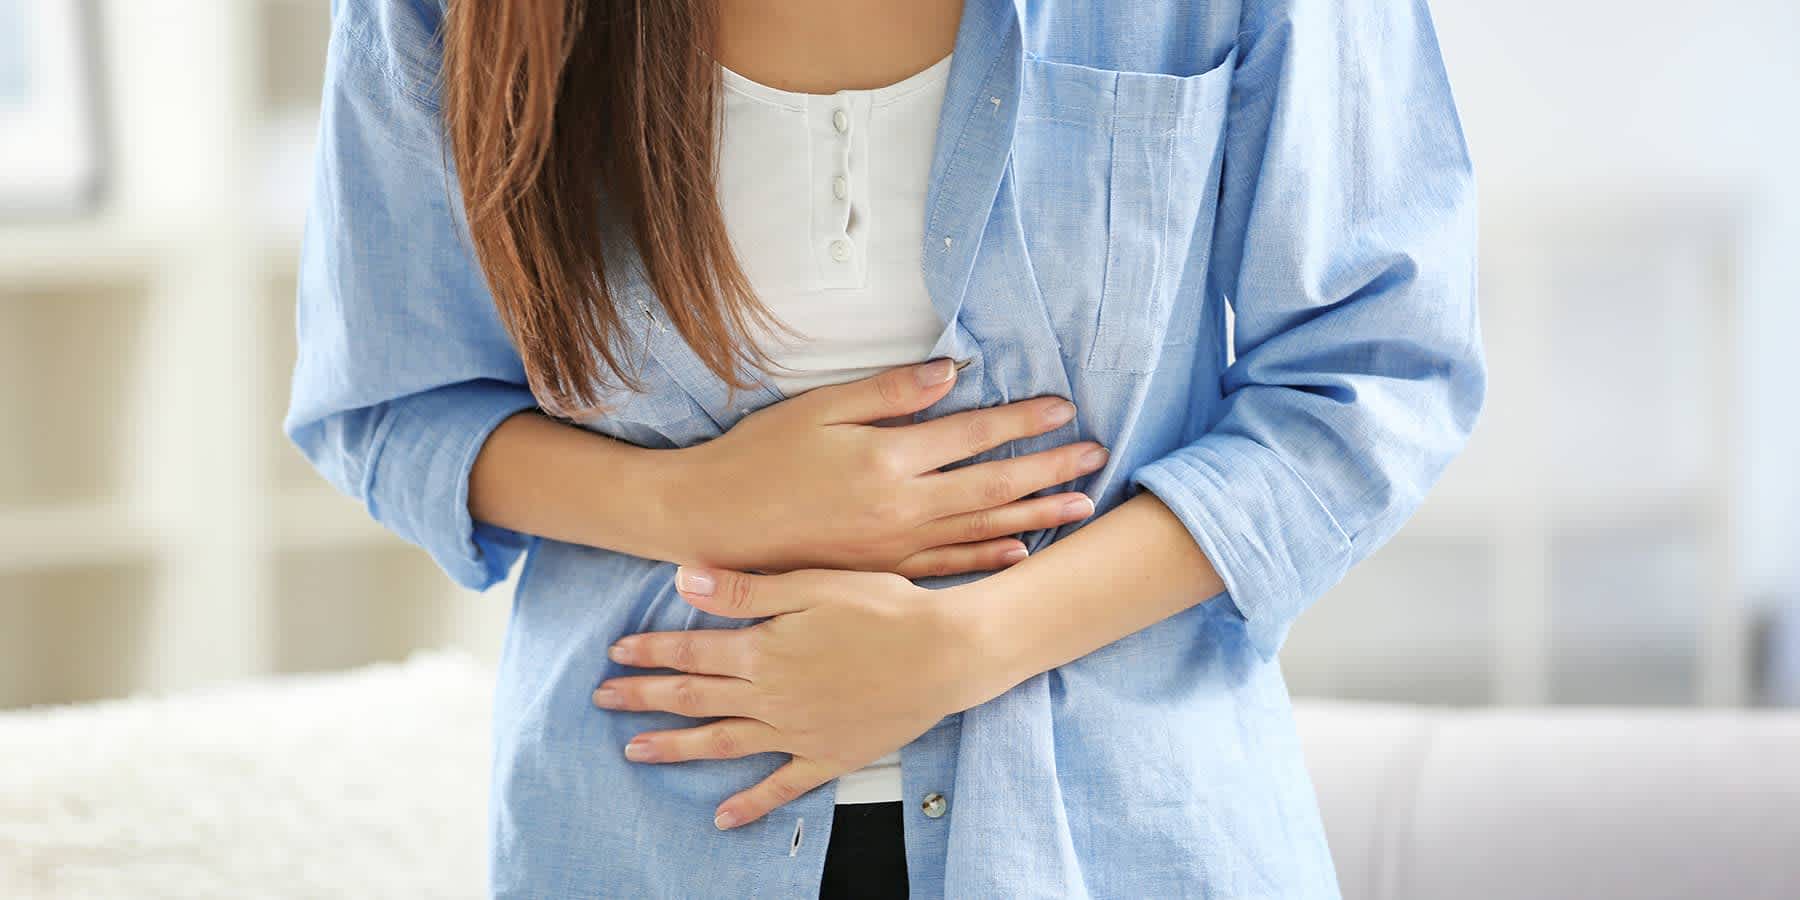 Woman experiencing abdominal pain as a common food allergy symptom